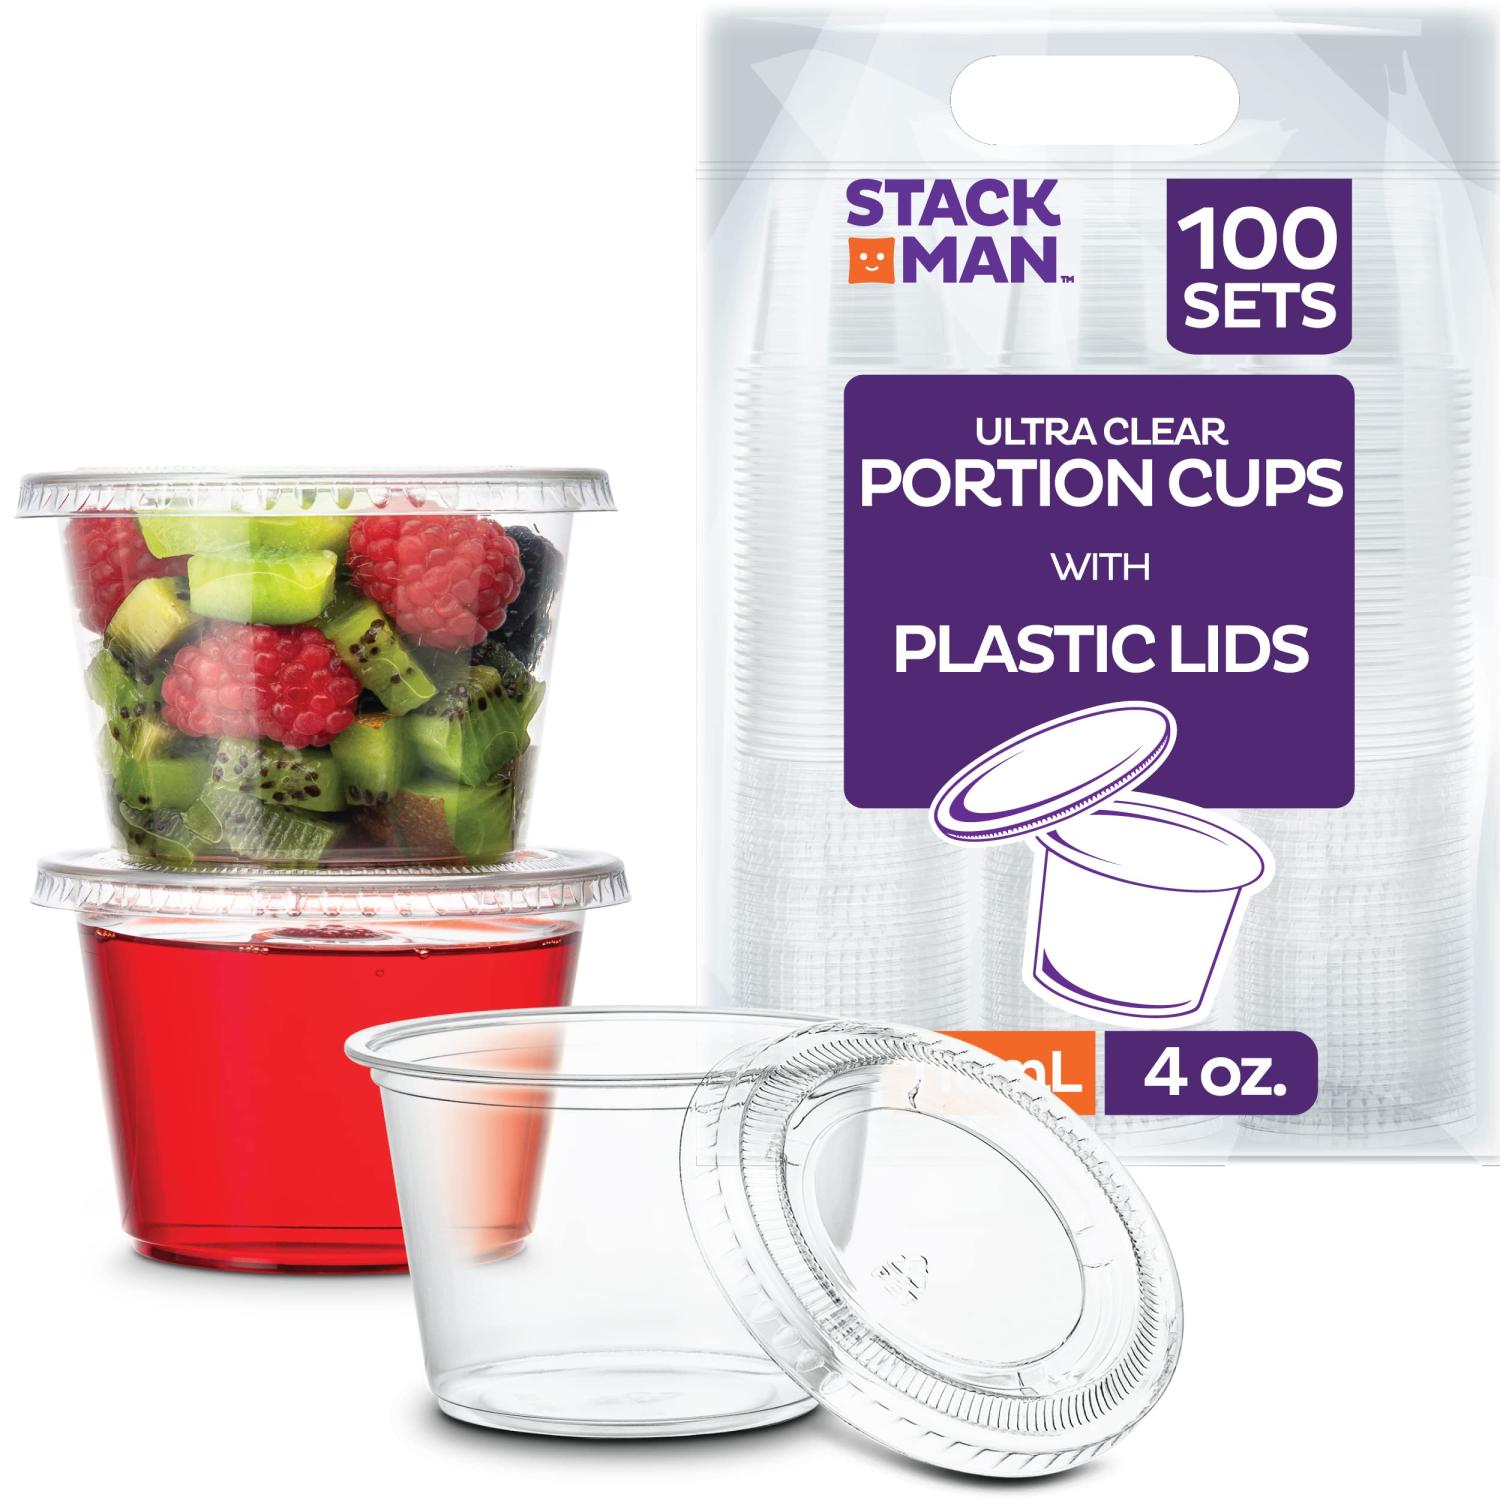 260 Sets - 2 oz Jello Shot Cups, Small Plastic Containers with Lids,  Airtight and Stackable Portion Cups, Salad Dressing Container, Dipping  Sauce Cups, Condiment Cups for Lunch, Party, Trips 2oz - 260